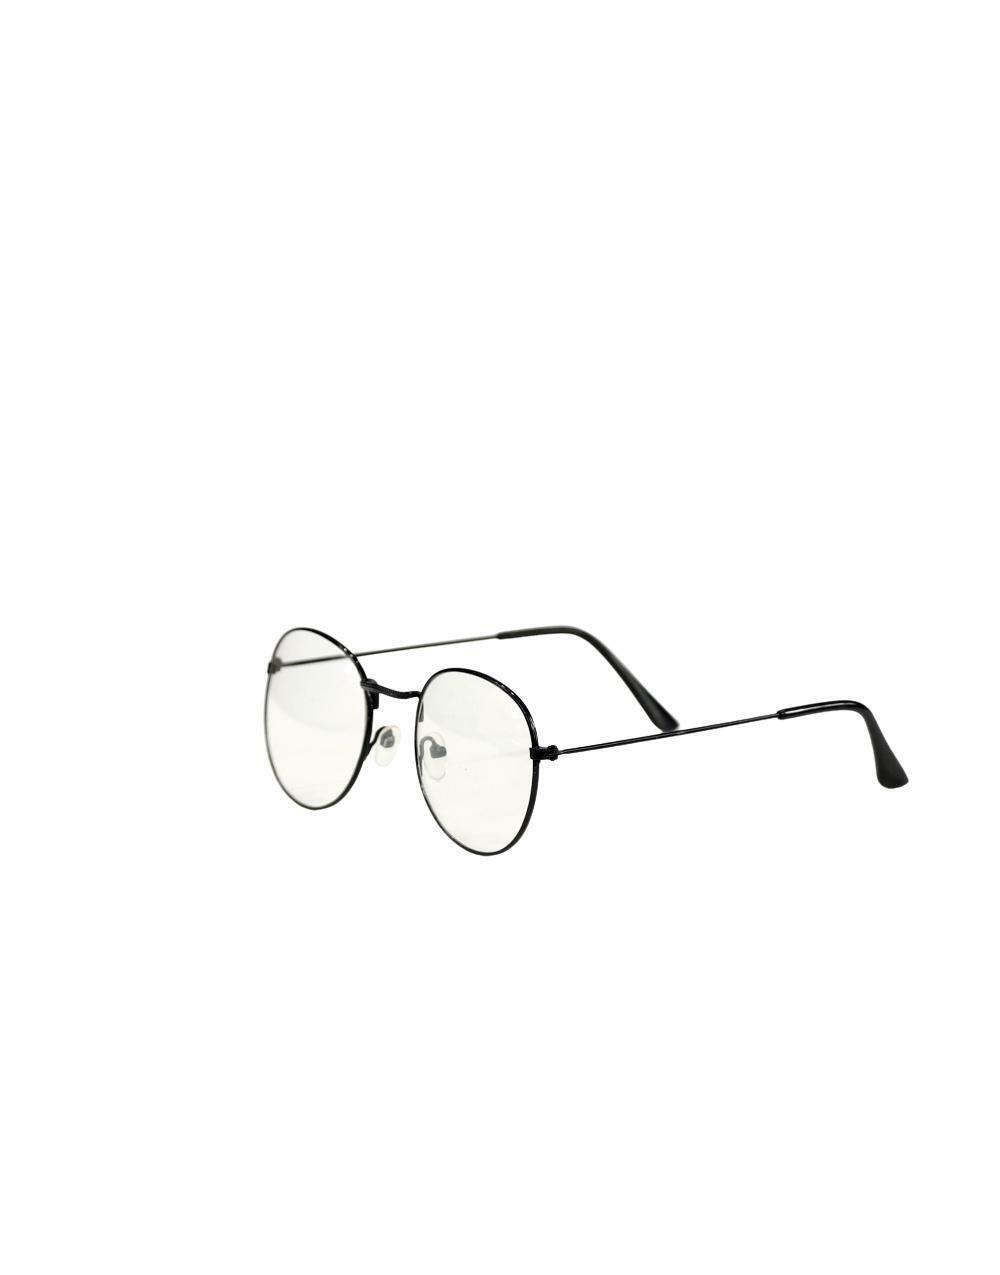 Unisex Glasses with UV-400 Lens Protection - STREET MODE ™